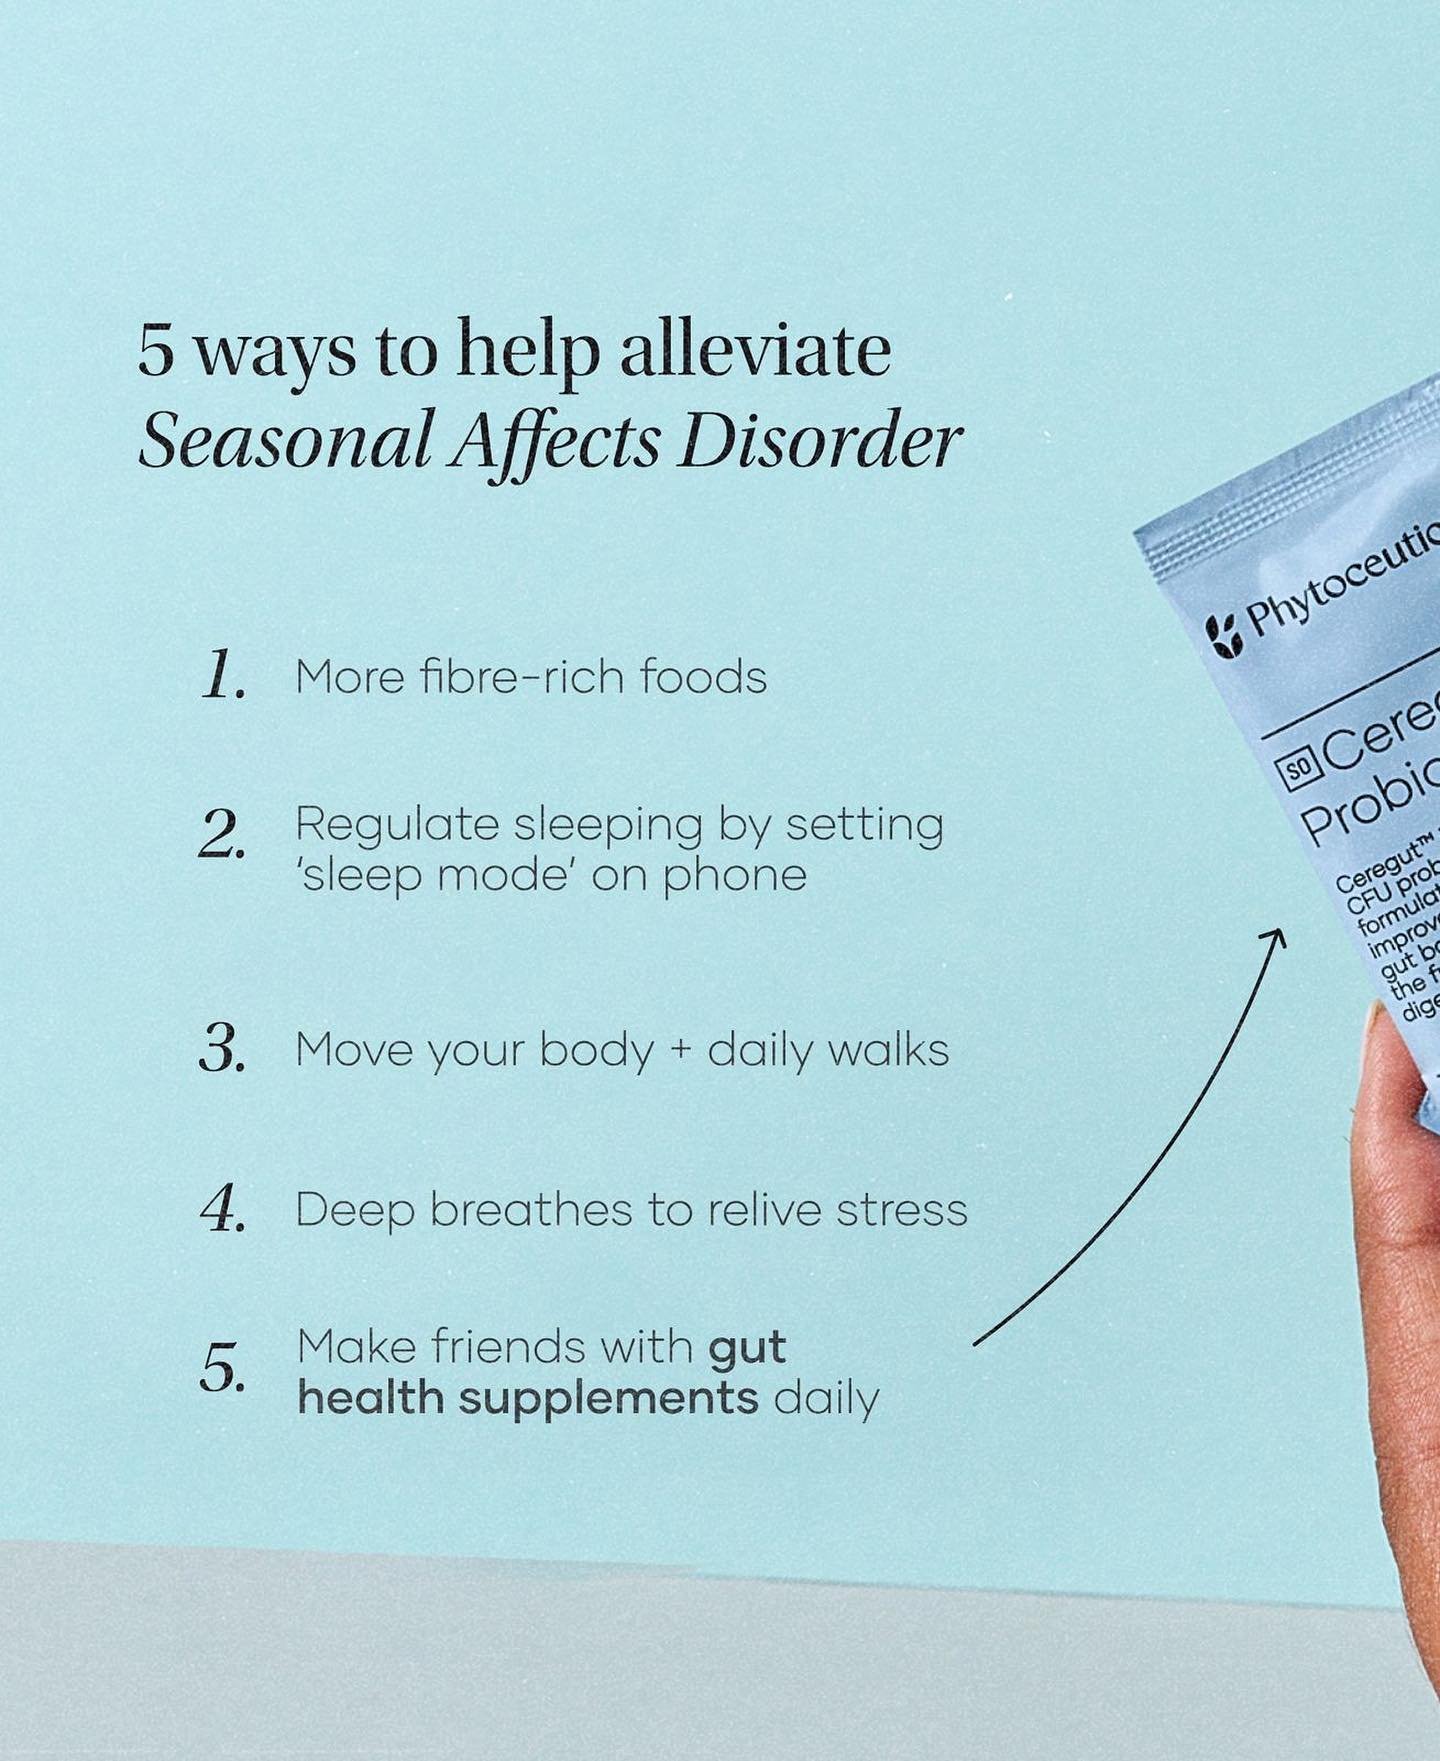 Dealing with a case of the SAD? Share this with someone who&rsquo;s been a bit down lately 💚 

Seasonal Affects Disorder is a form of cyclical depression due to the reduced levels of sunlight in the winter months 💚 There are treatments that can hel